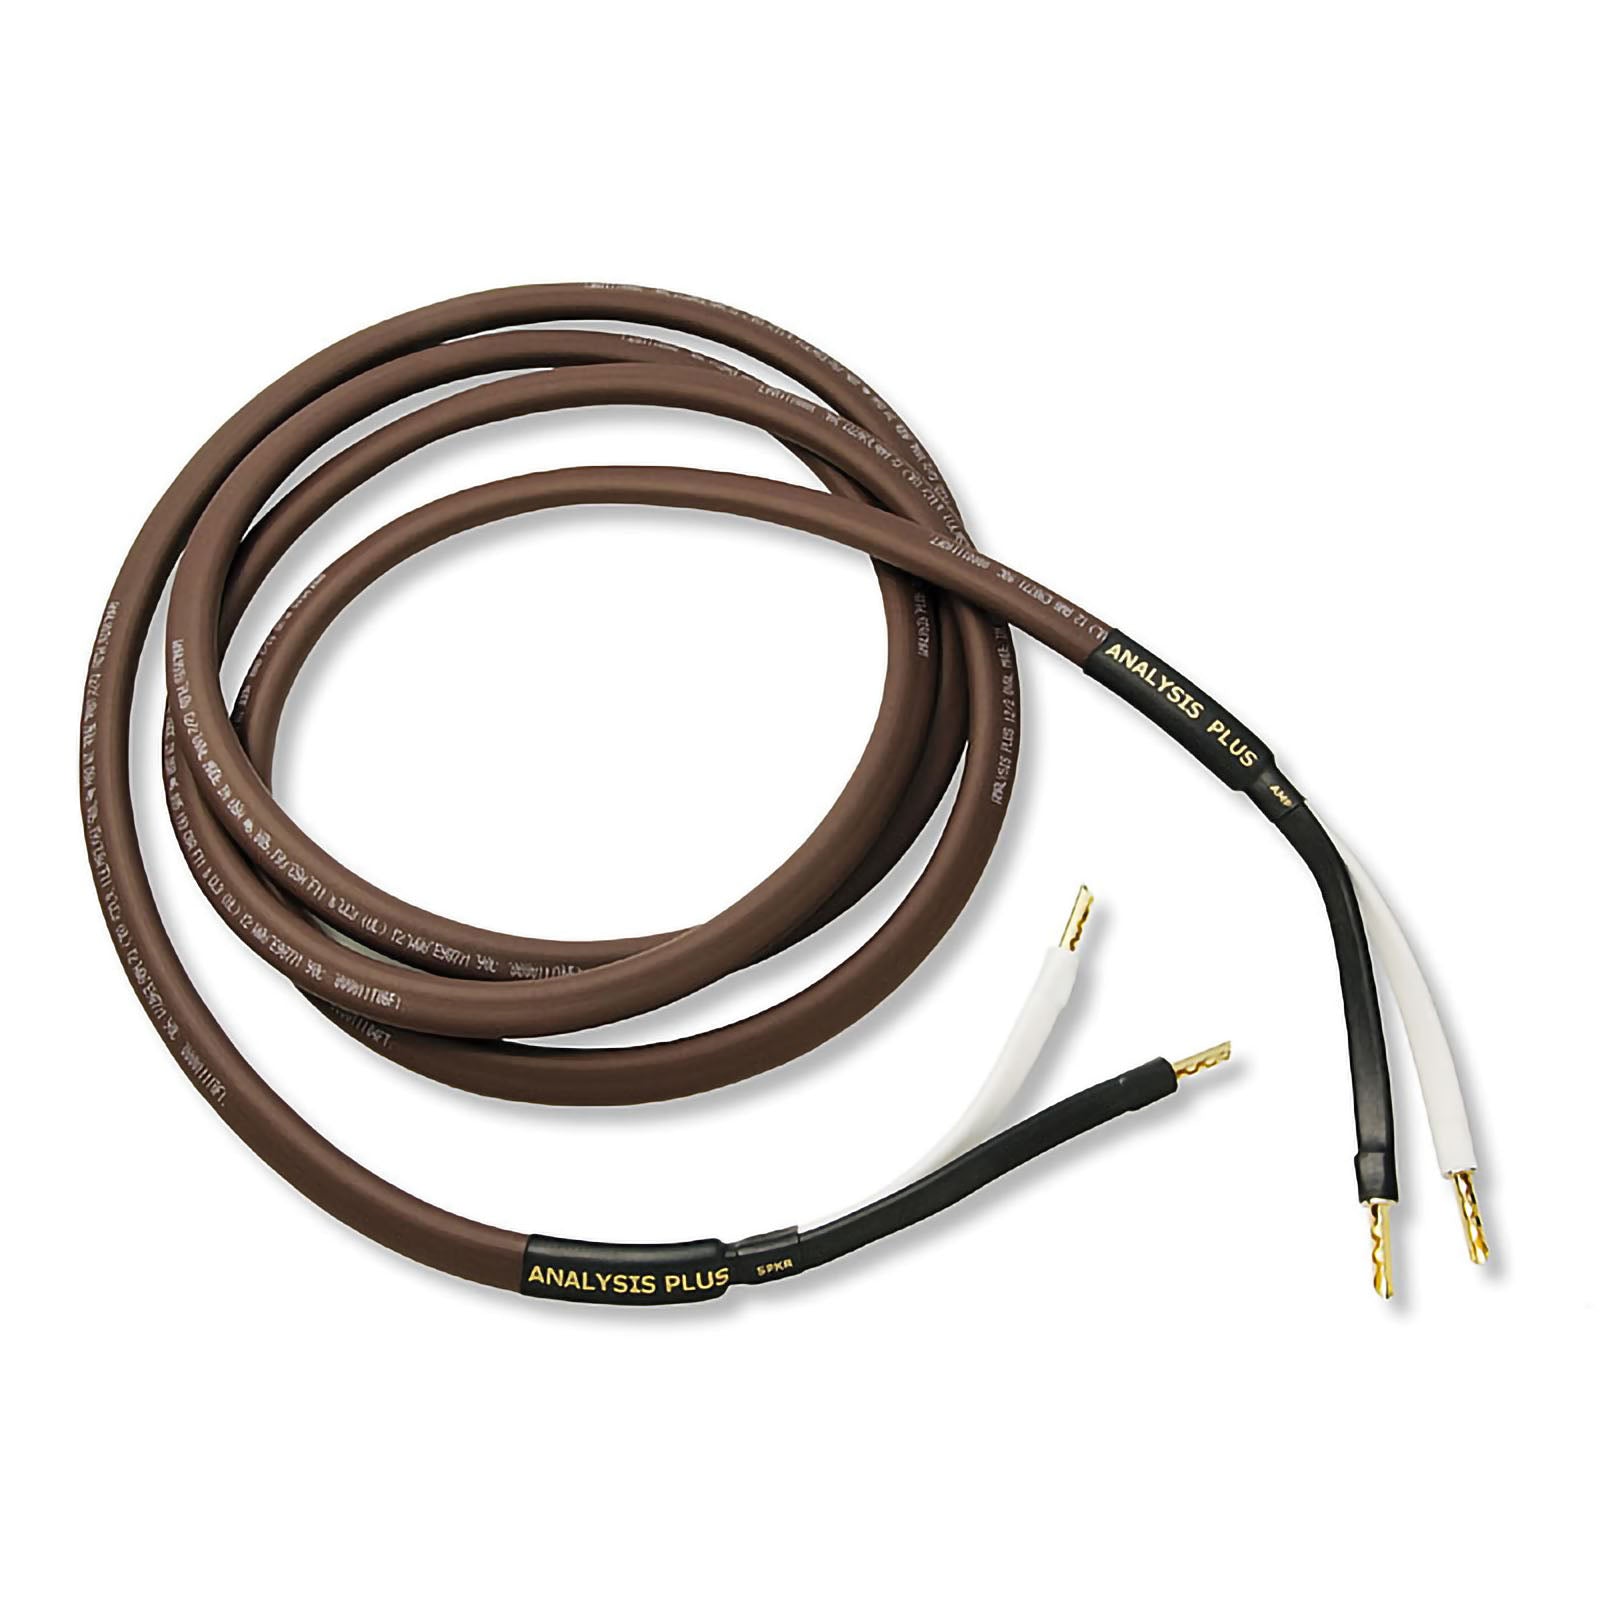 Analysis Plus Oval Chocolate 12/2 Speaker Cable